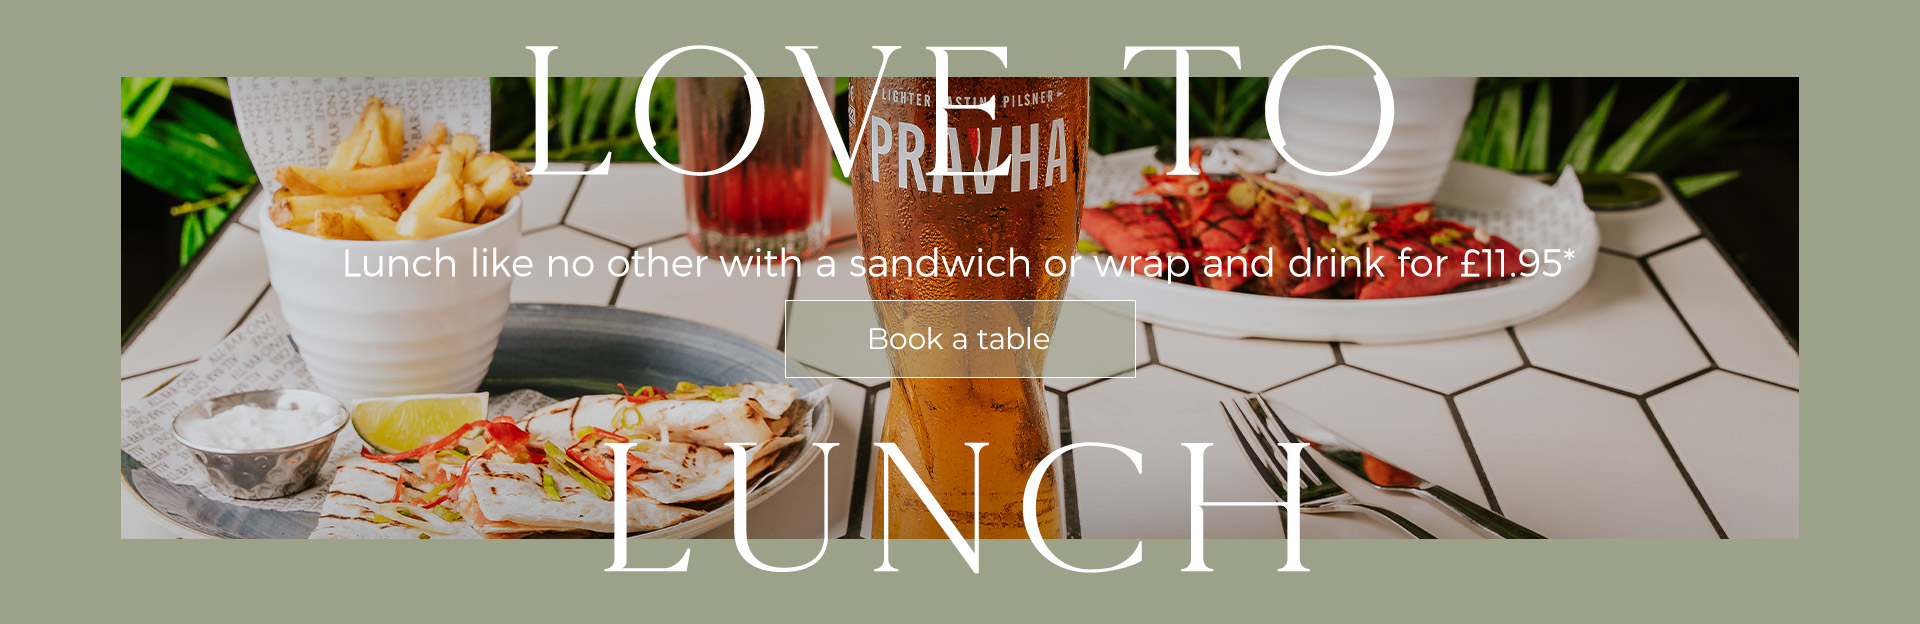 Lunch Offer at All Bar One Cannon Street